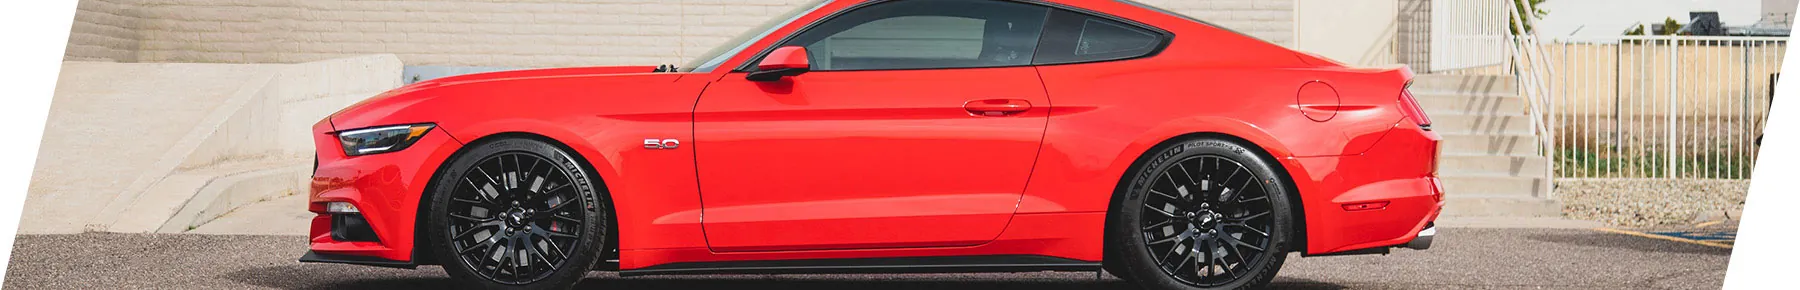 2015-2020 Mustang GT 5.0L Performance Parts & Accessories